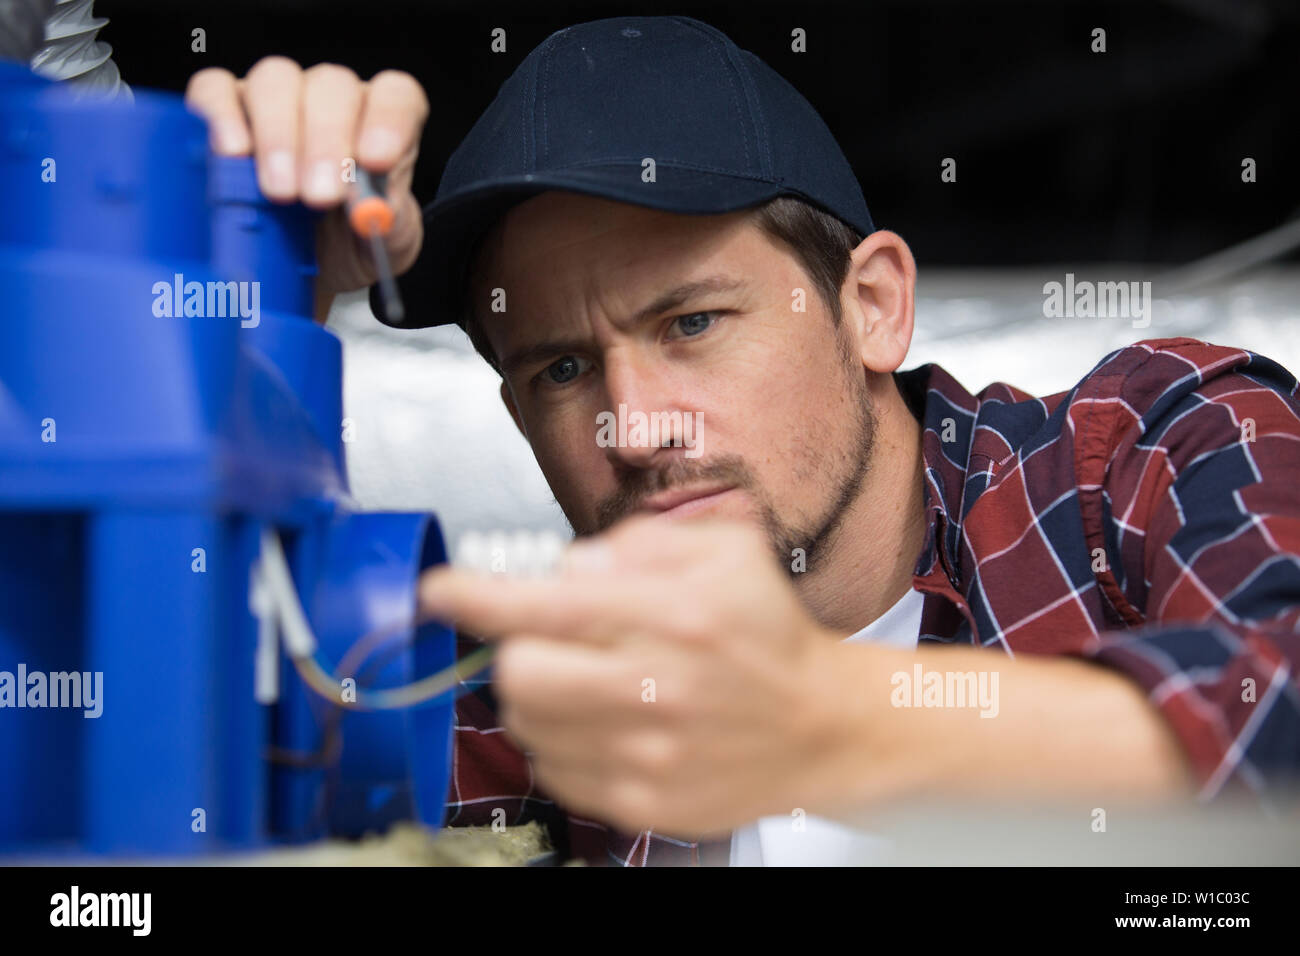 man with a screwdriver during ceilling ventilation Stock Photo